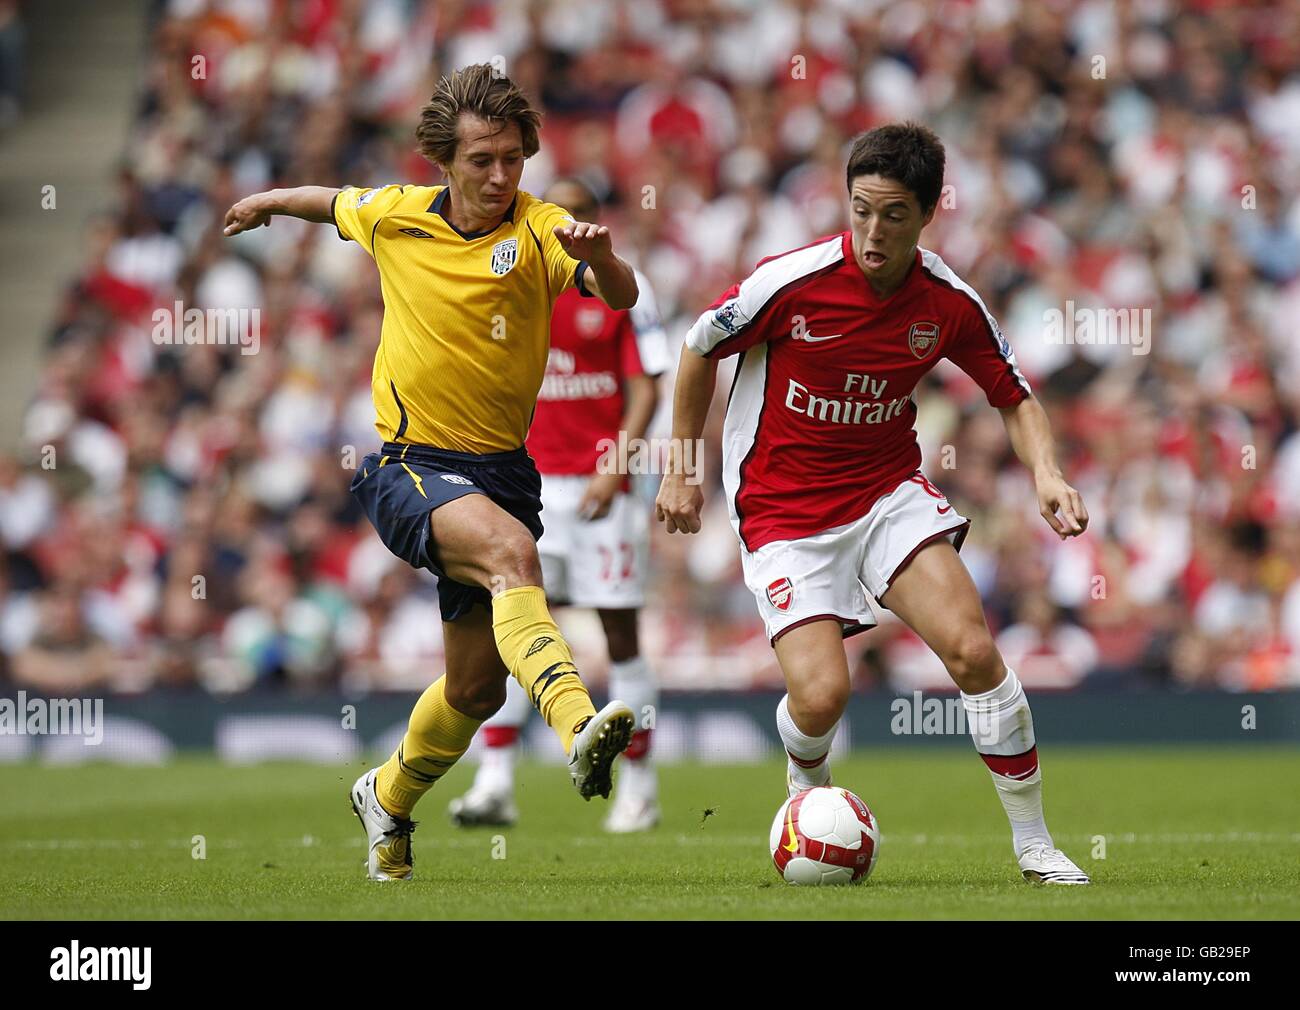 Arsenal's Samir Nasri and West Bromwich Albion's Marek Cech (left) Albion battle for the ball Stock Photo